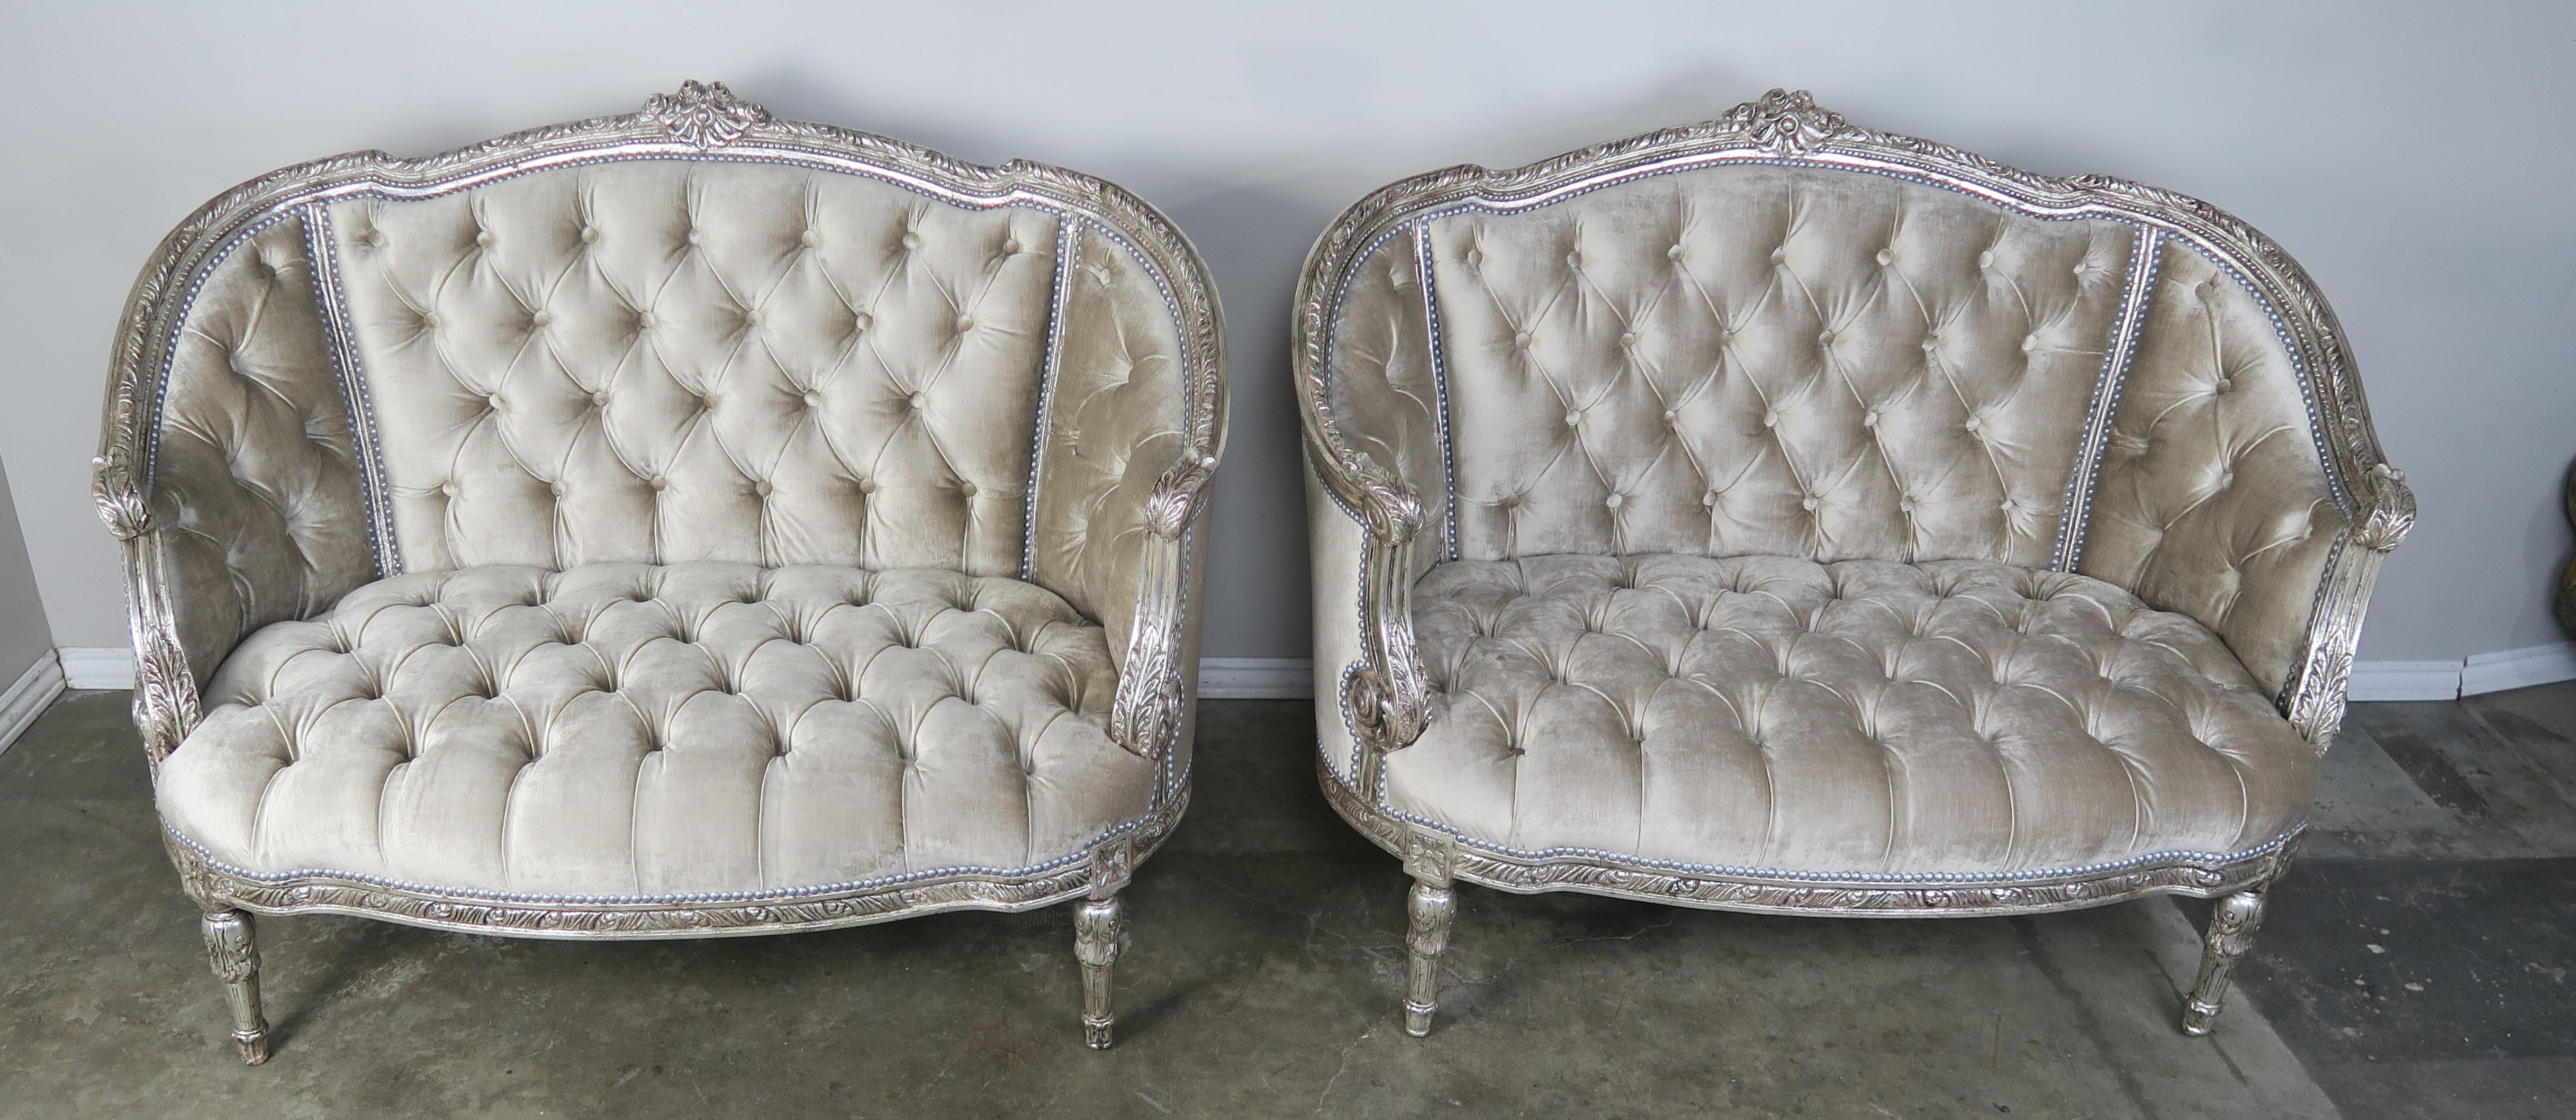 Pair of French carved wood silver gilt settees stand on four straight legs and were newly upholstered in a platinum colored tufted velvet with silver nailhead trim detail.
Seat height 16